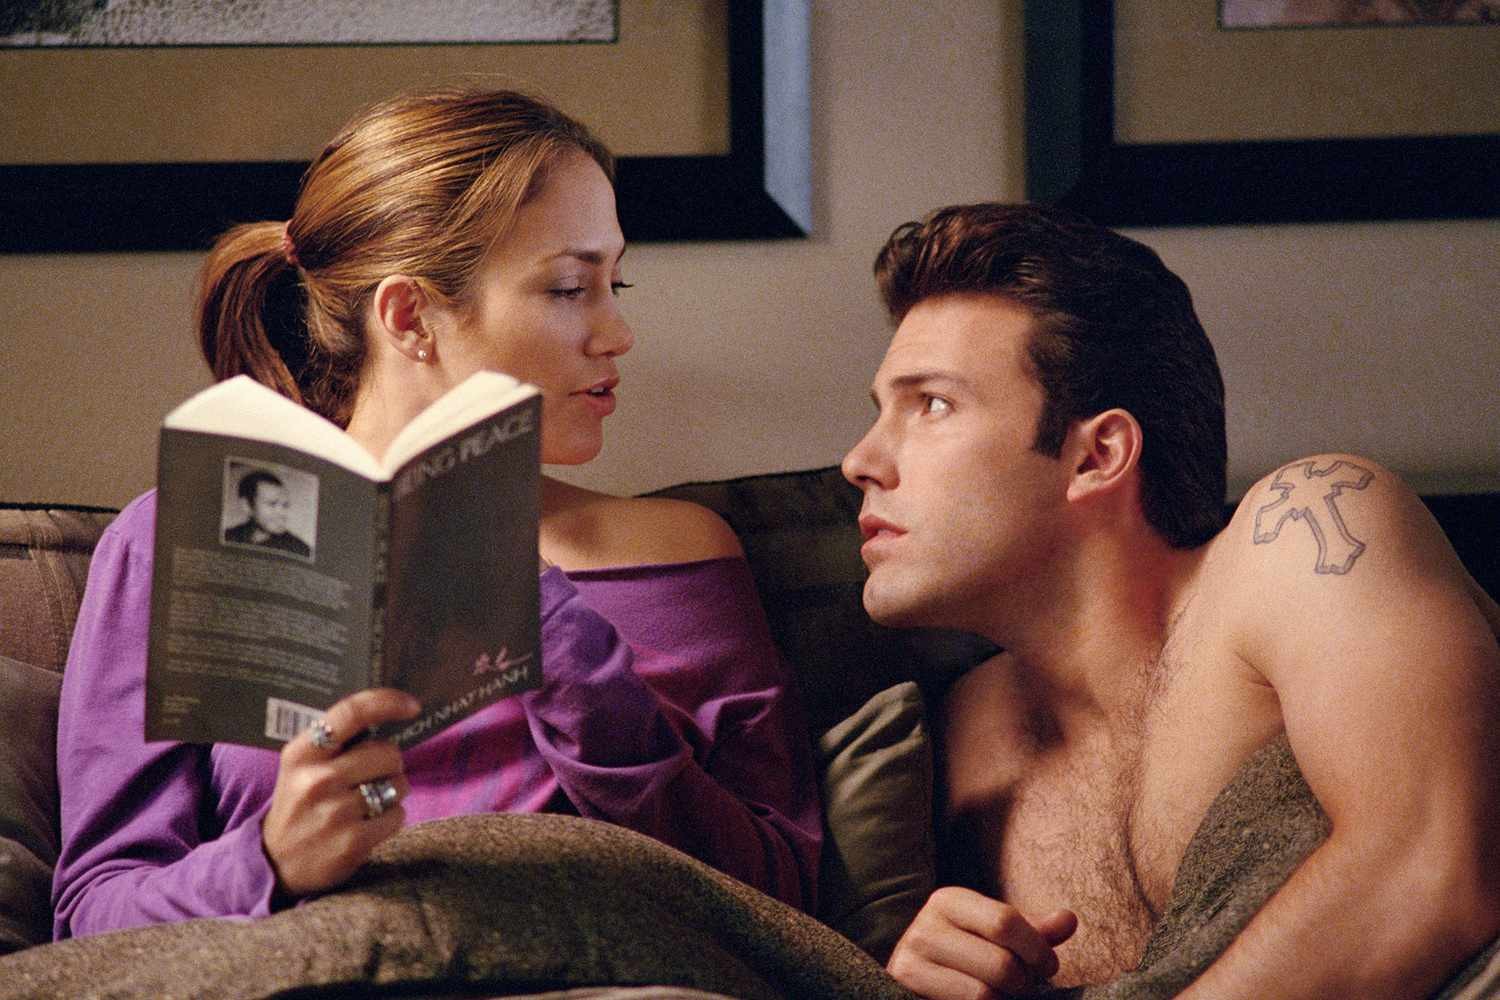 Ben Affleck and Jennifer Lopez found love on the sets of Gigli